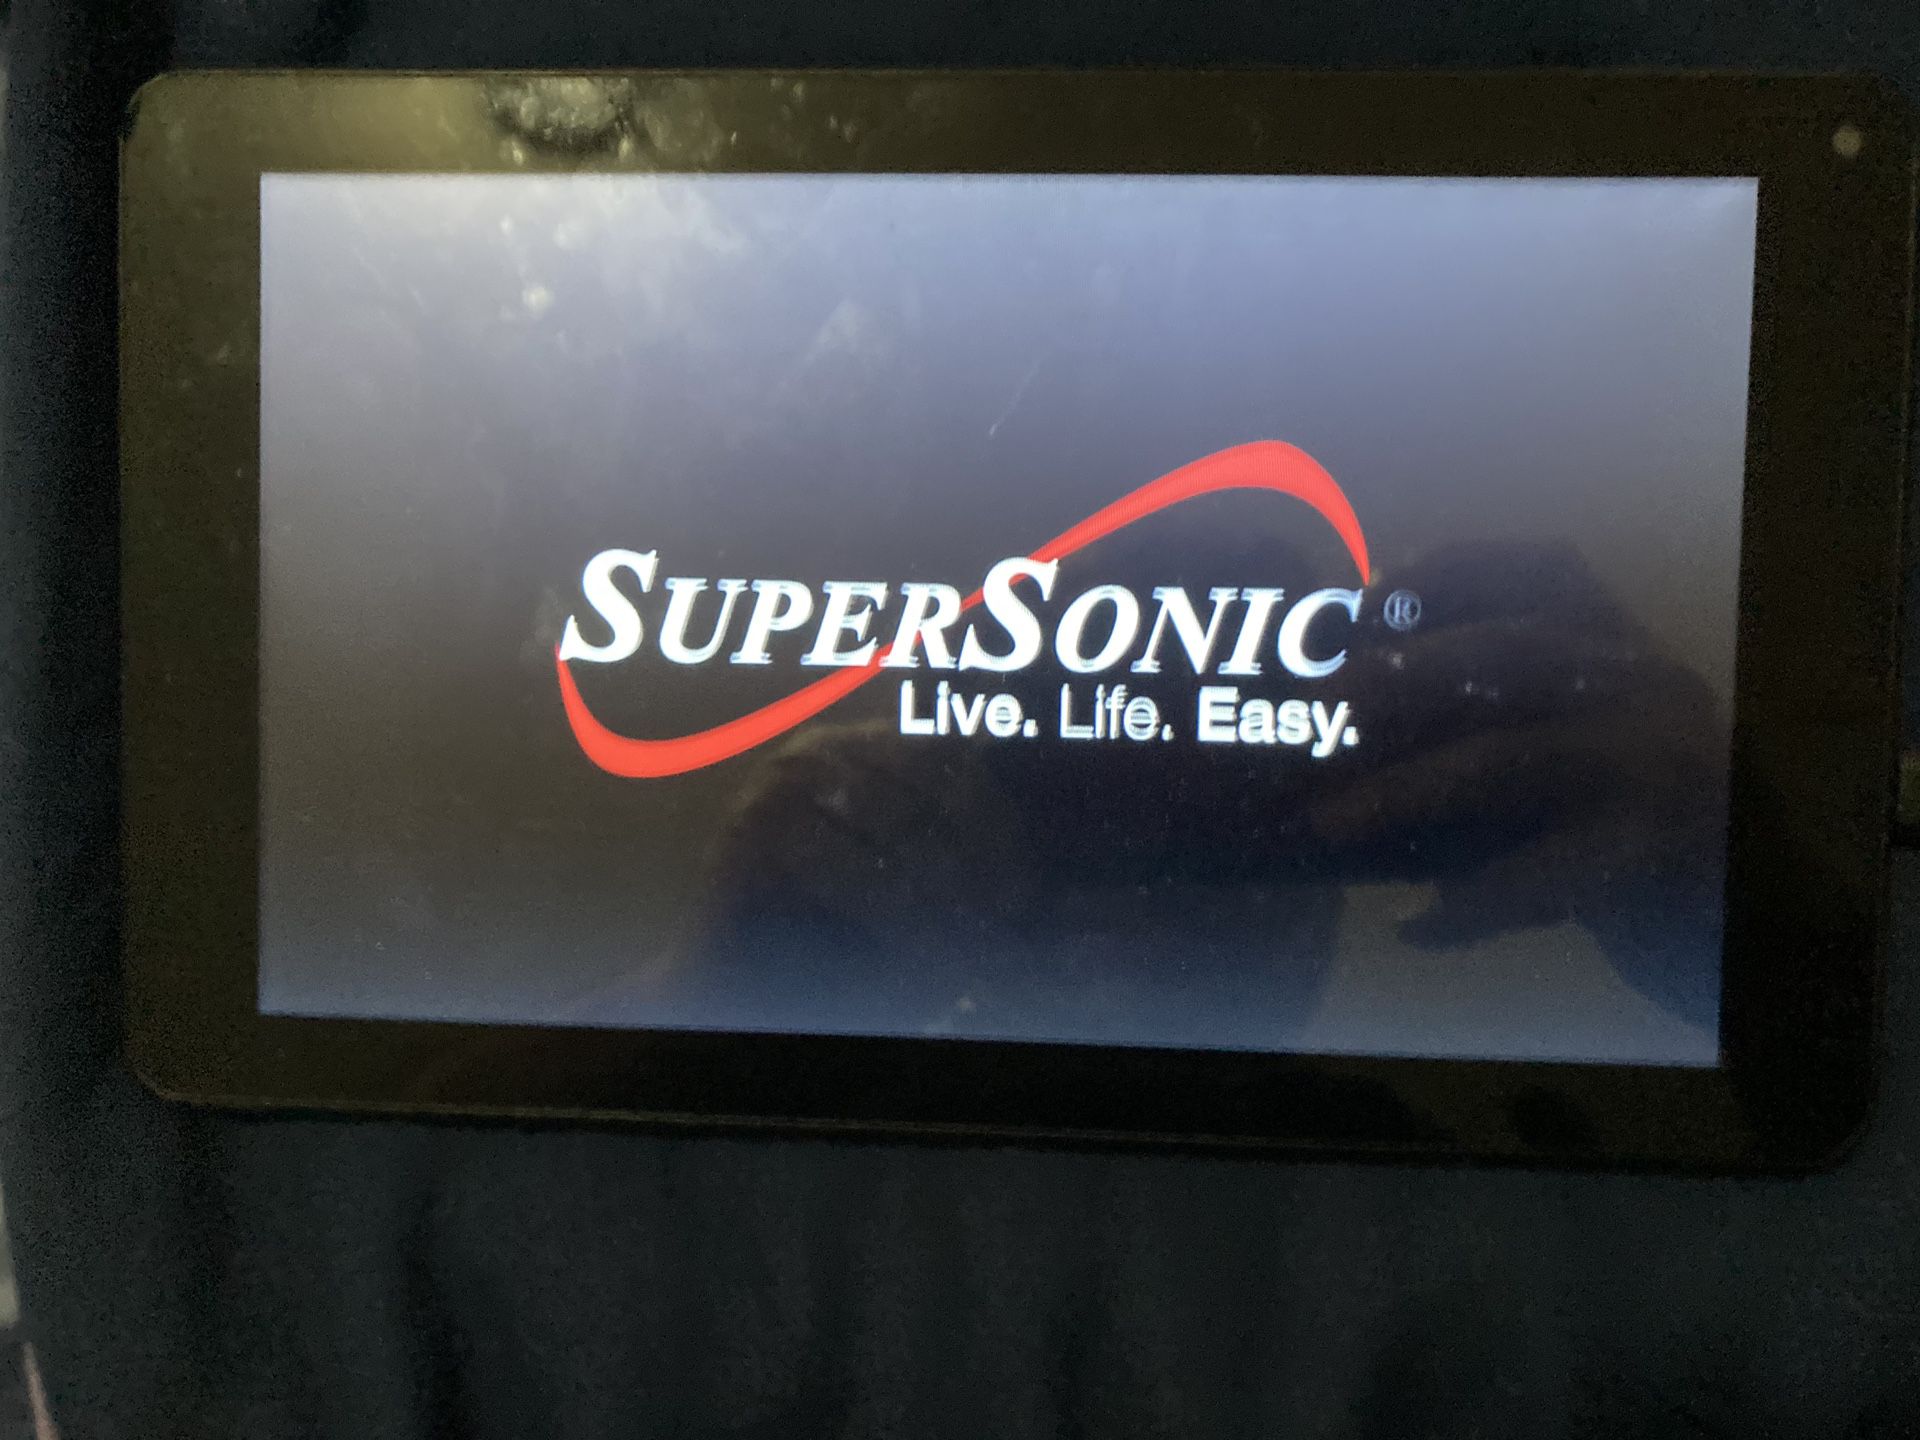 Supersonic Tablet Android 